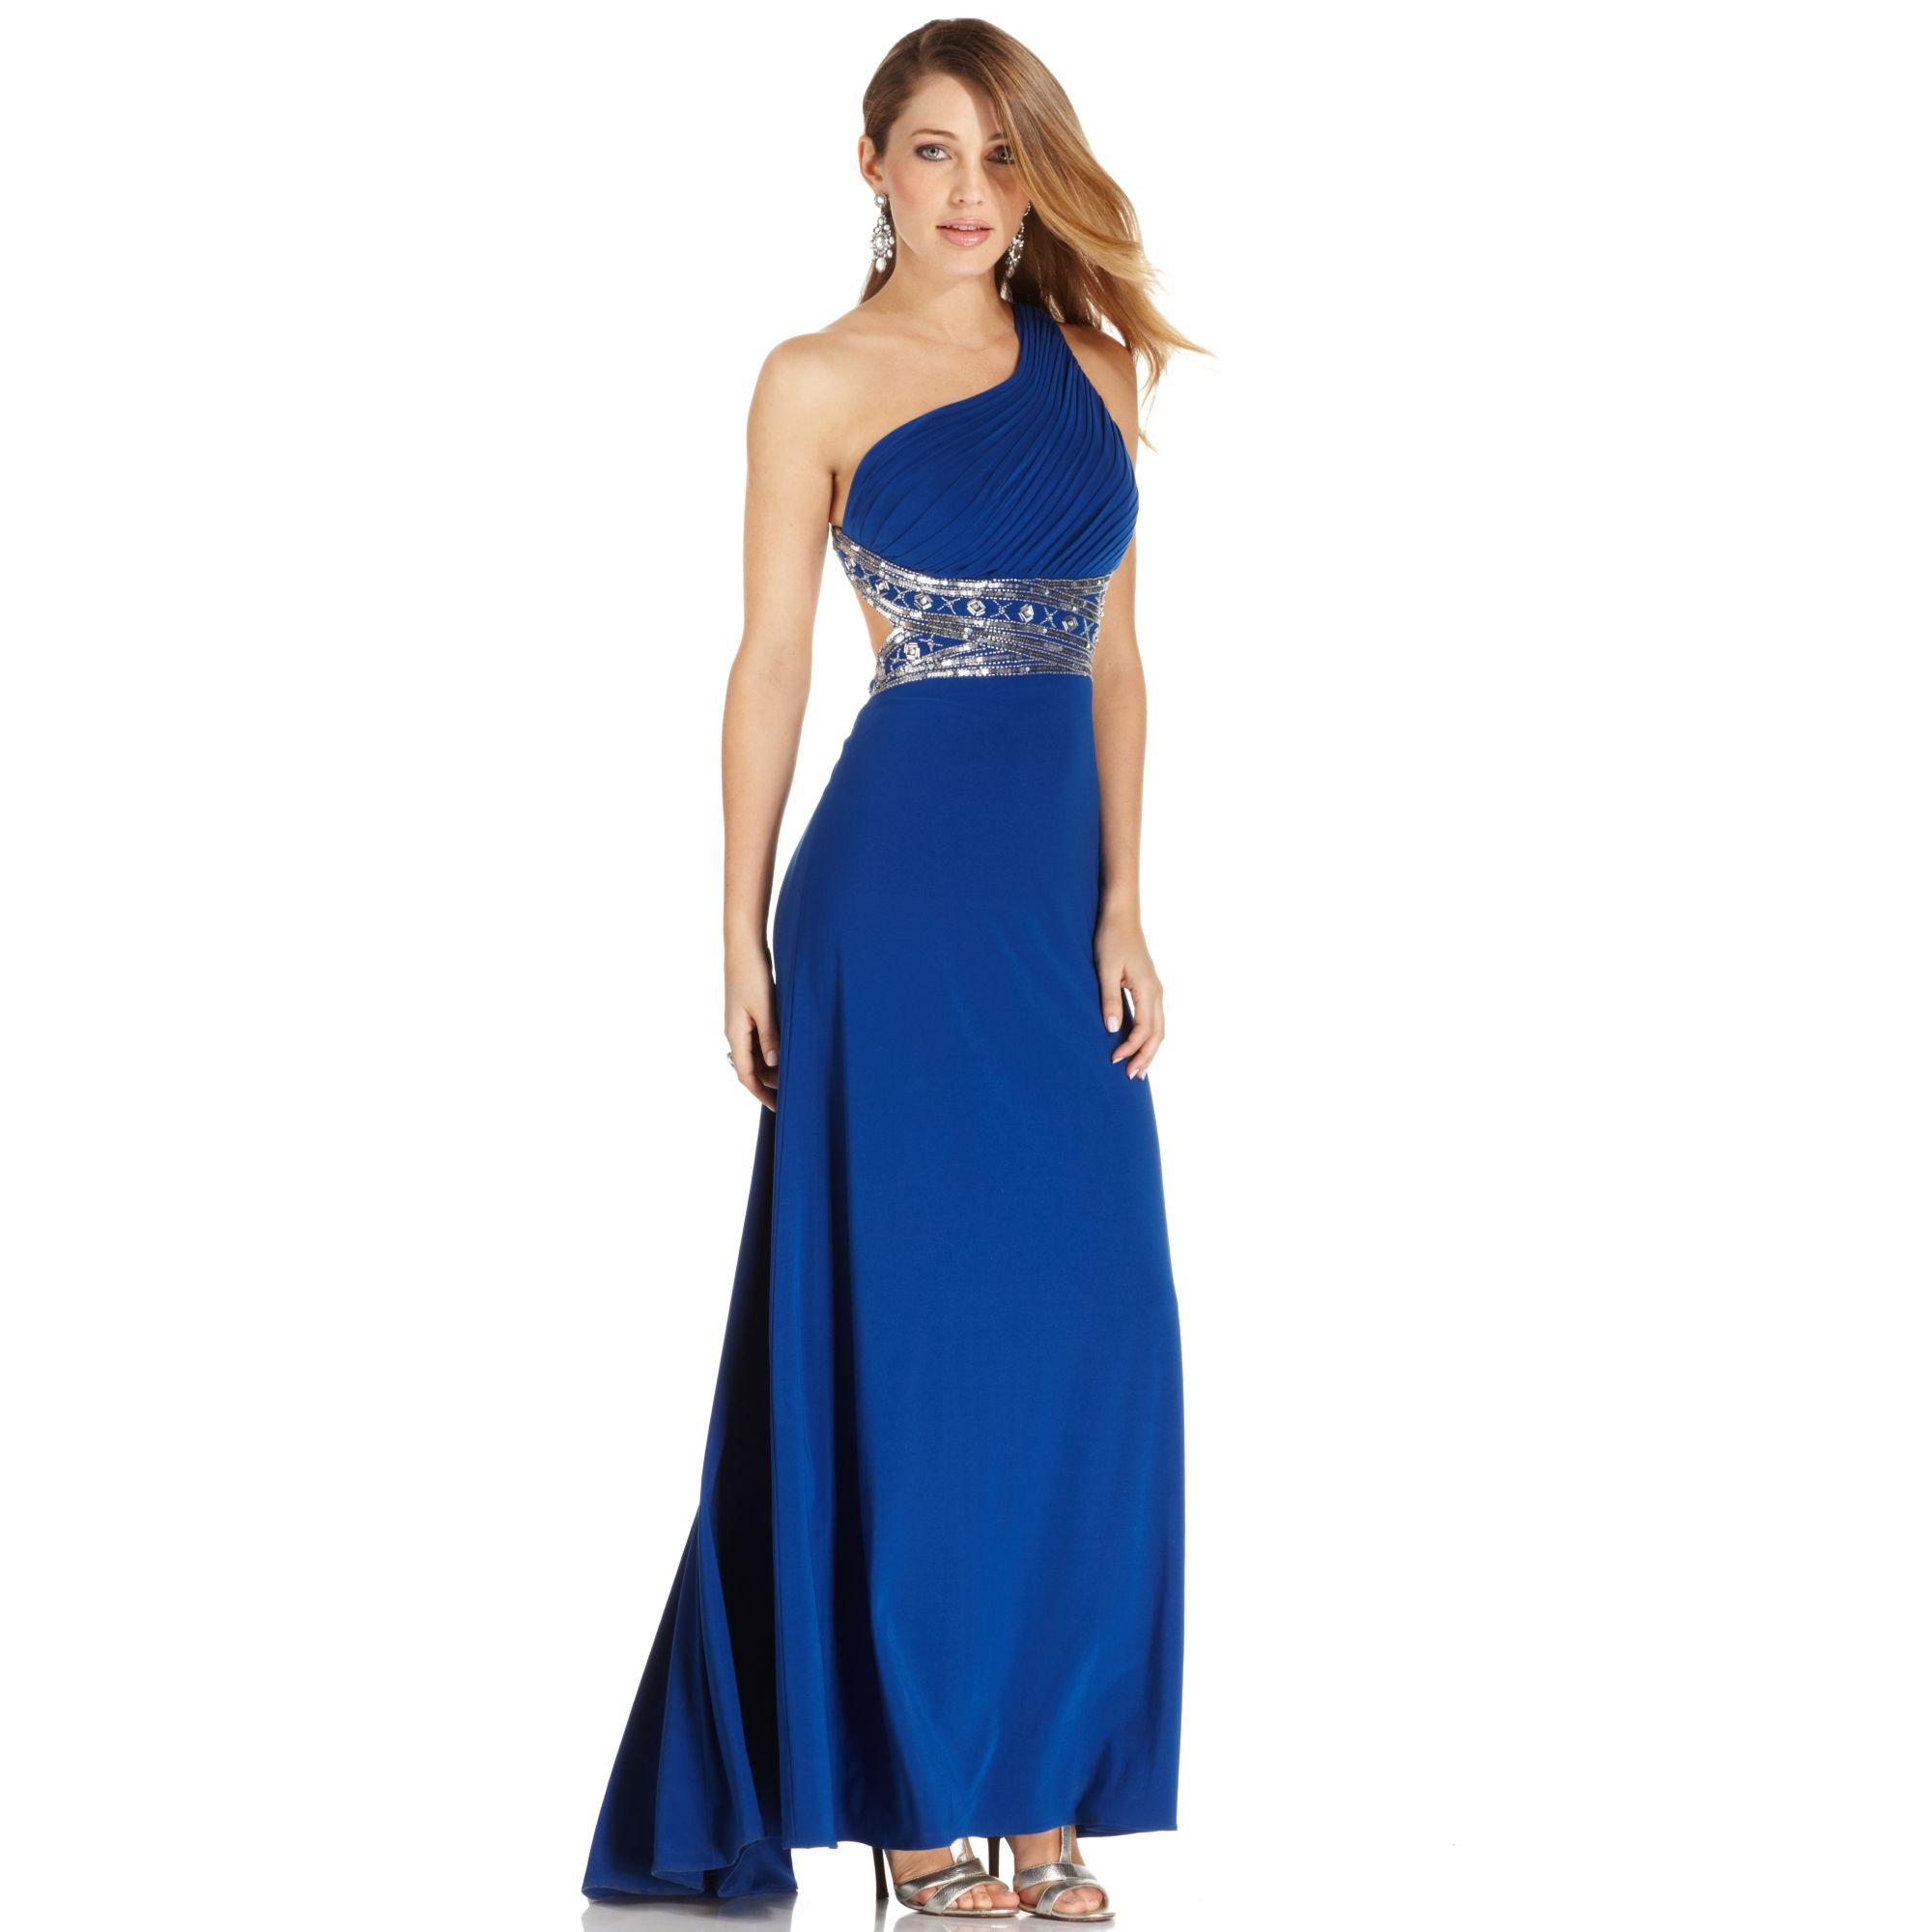 Betsy & adam One-Shoulder Sequined Gown in Blue (Royal Blue) | Lyst